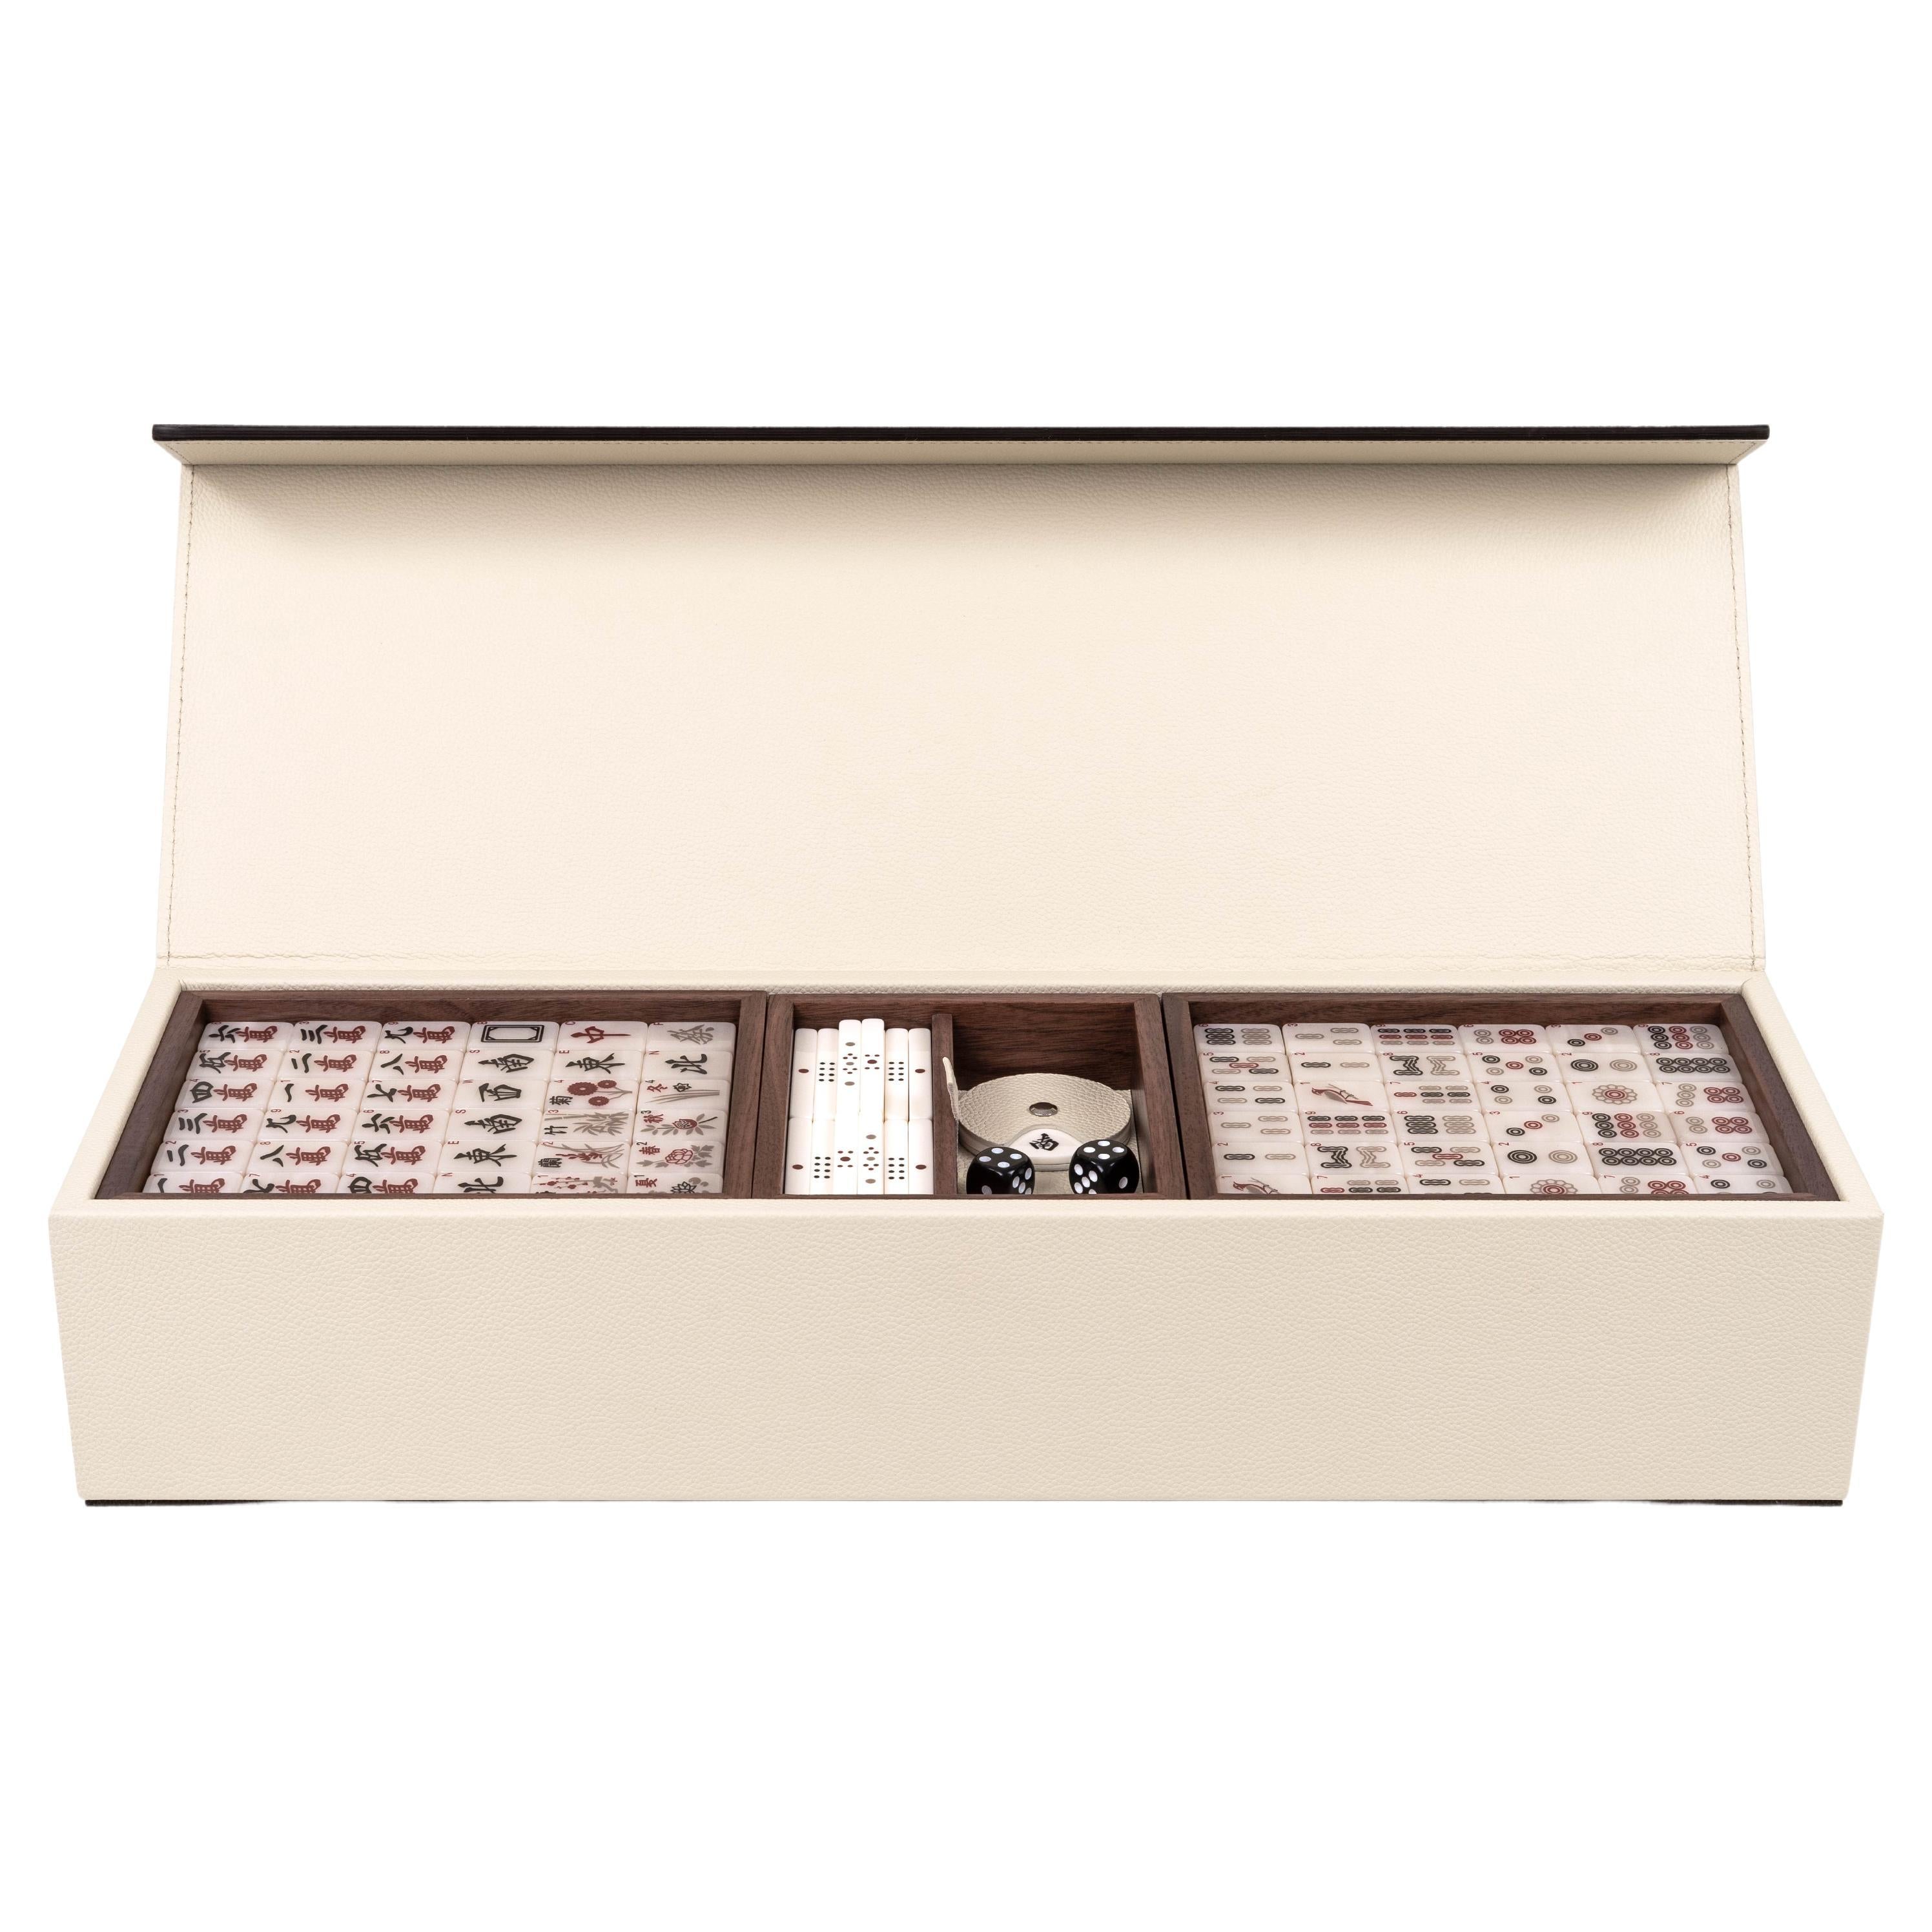 21st Mahjong Game Set in Walnut Wood and Leather Handmade in Italy For Sale